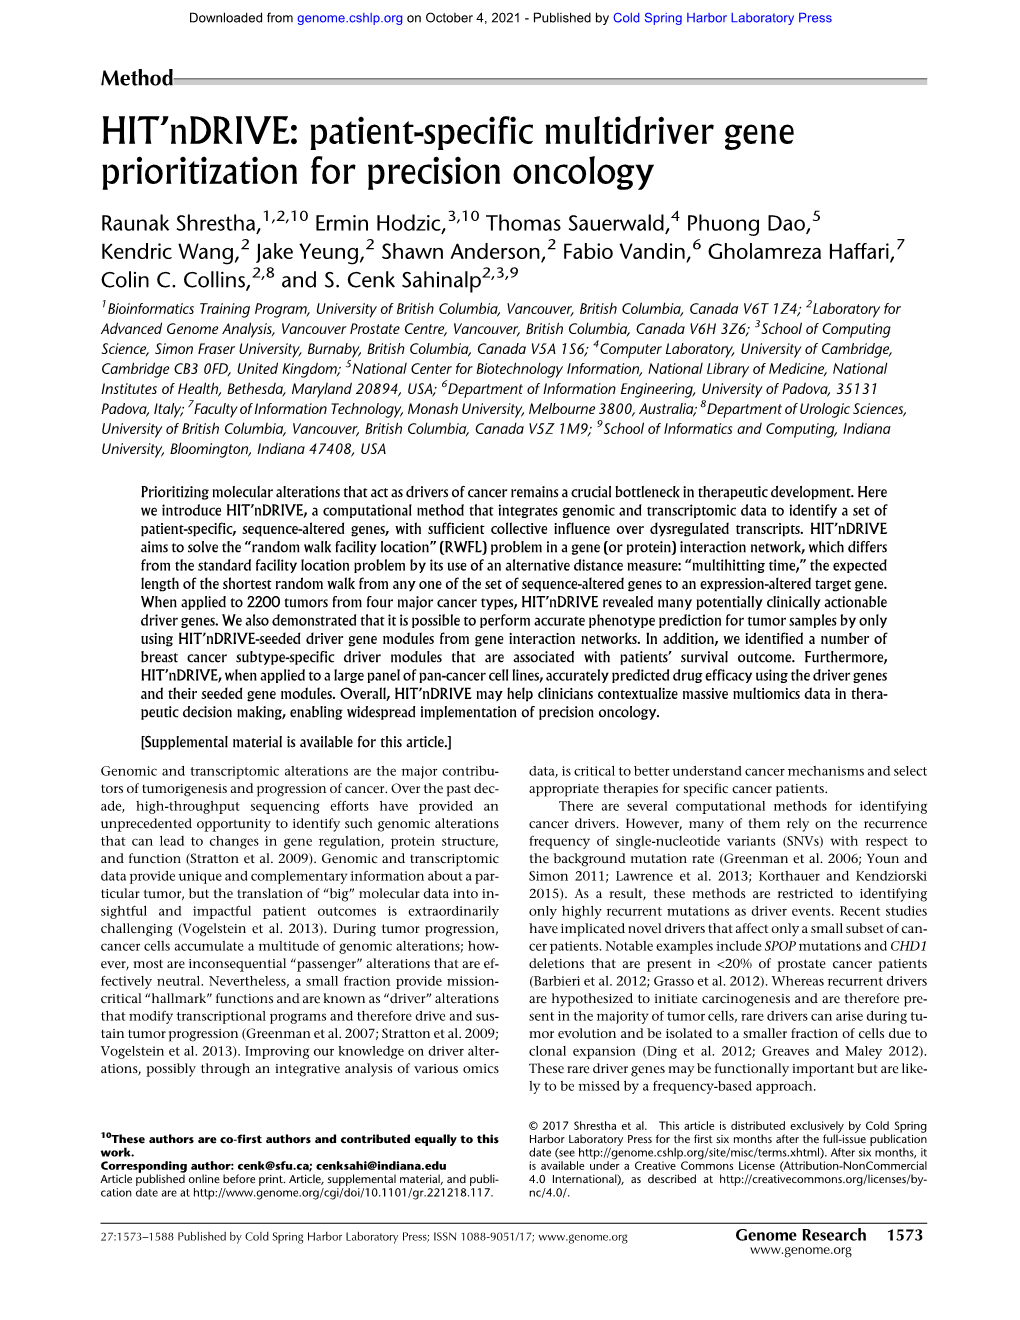 HIT'ndrive: Patient-Specific Multidriver Gene Prioritization for Precision Oncology